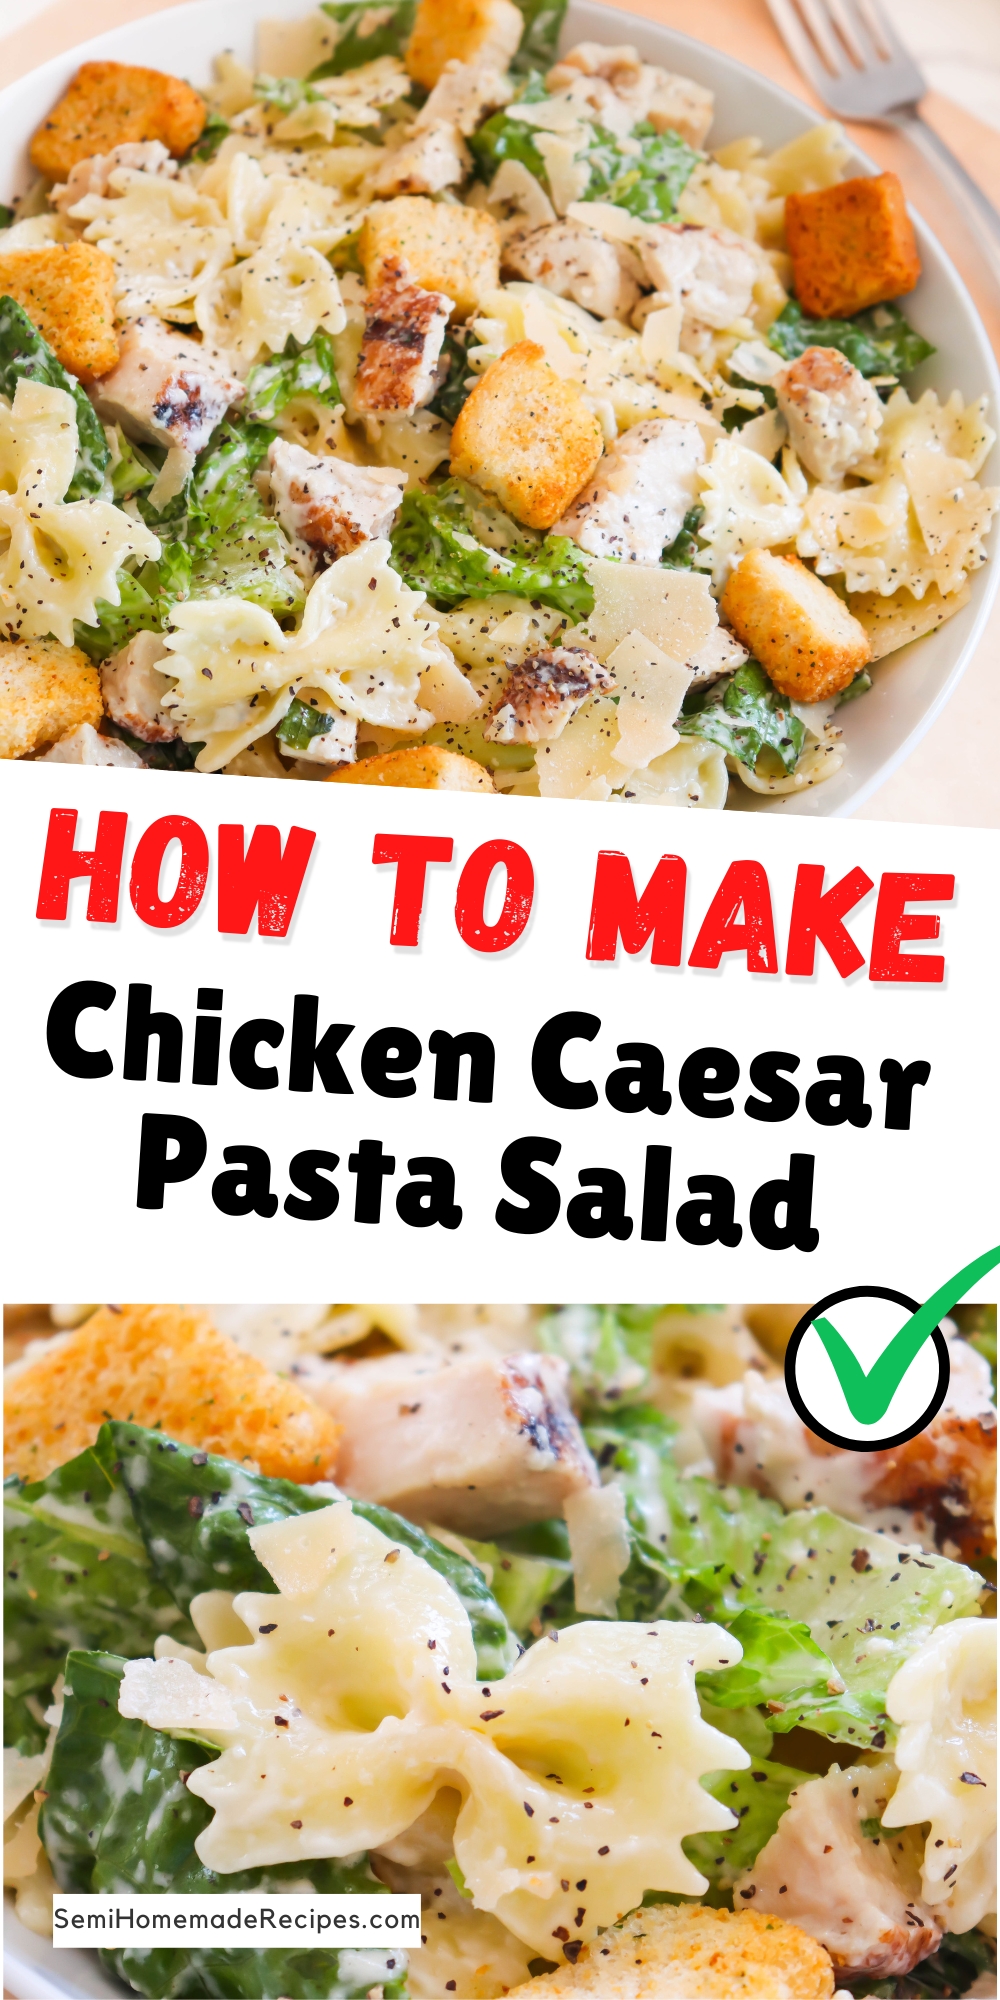 In just 30 minutes, you can create a crowd-pleasing Chicken Caesar Pasta Salad that will leave your guests craving for more. Don't hesitate to give this recipe a try and enjoy the delicious flavors. Perfect for your next dinner, potluck or picnic.